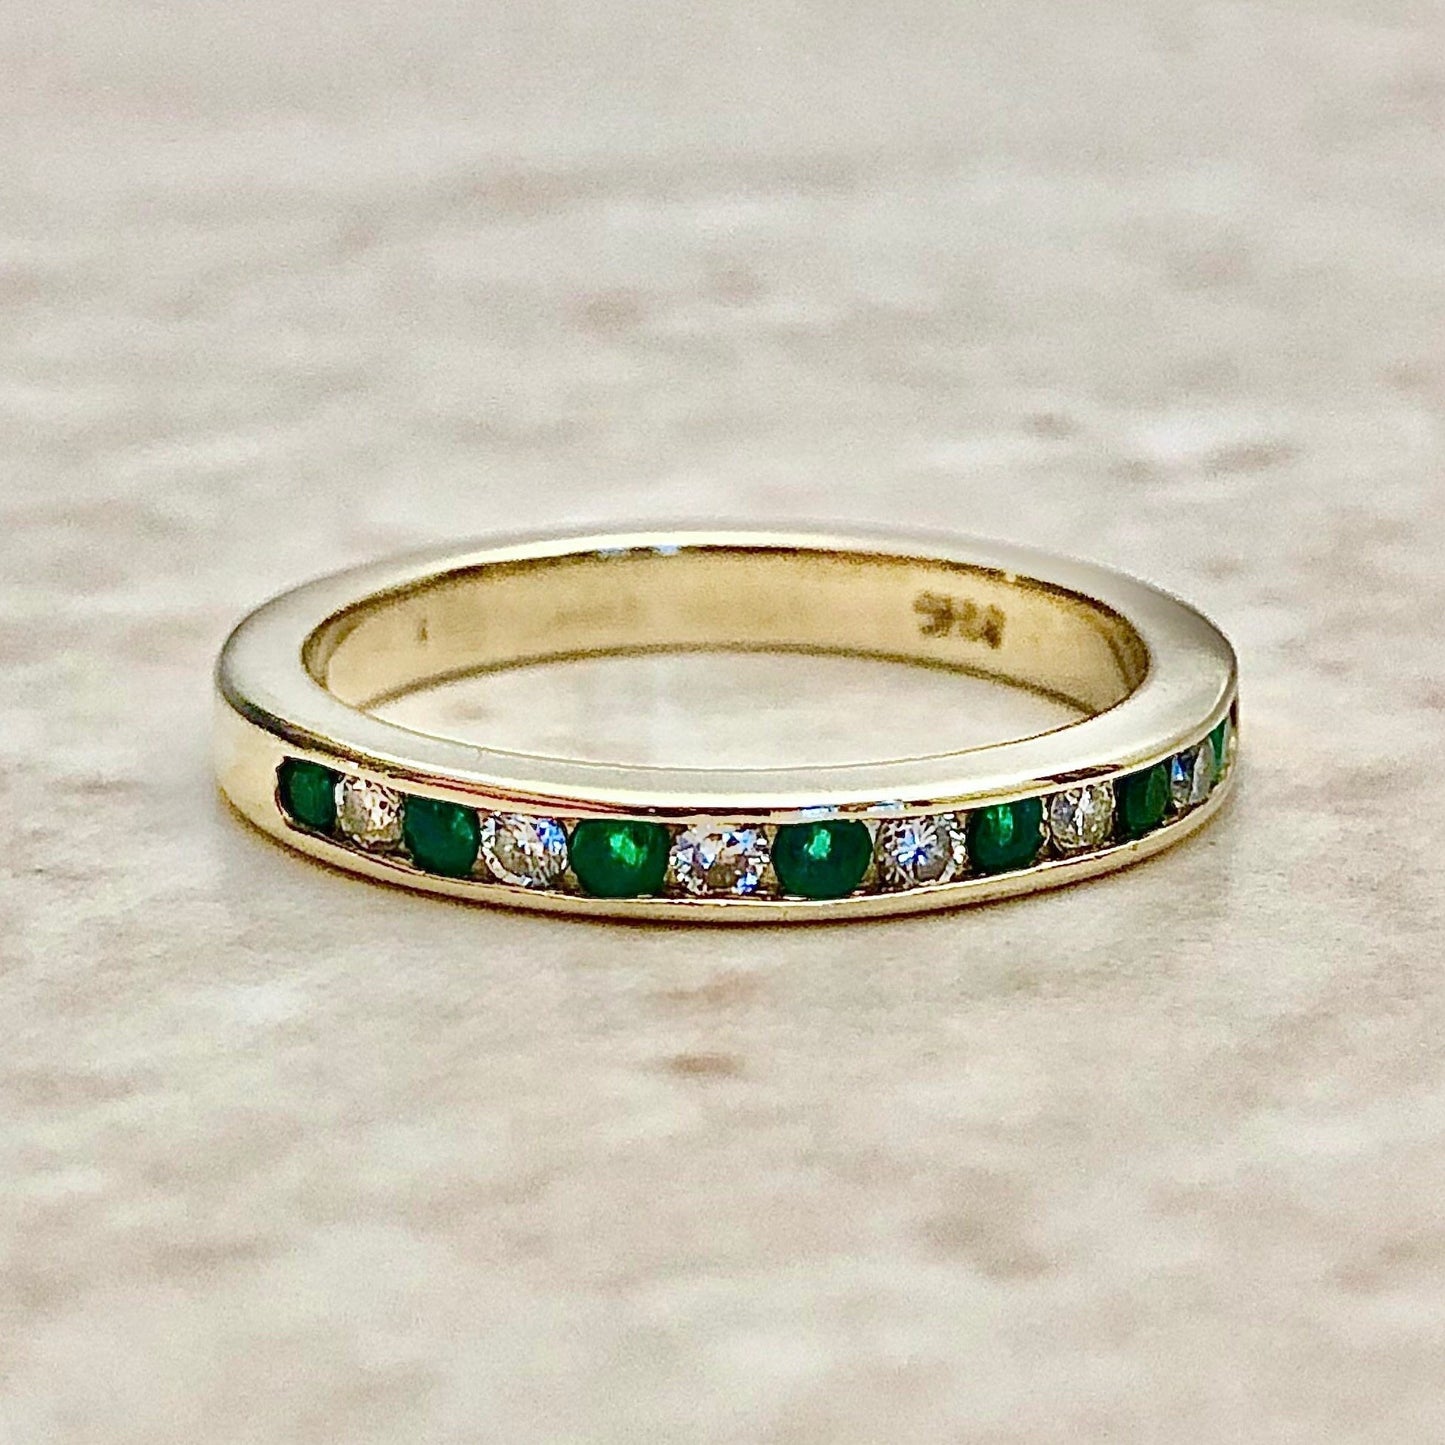 Fine Natural Emerald & Diamond Ring - 14K Yellow Gold - Genuine Gemstone - Anniversary Ring - Promise Ring - April May Birthstone - Size 6